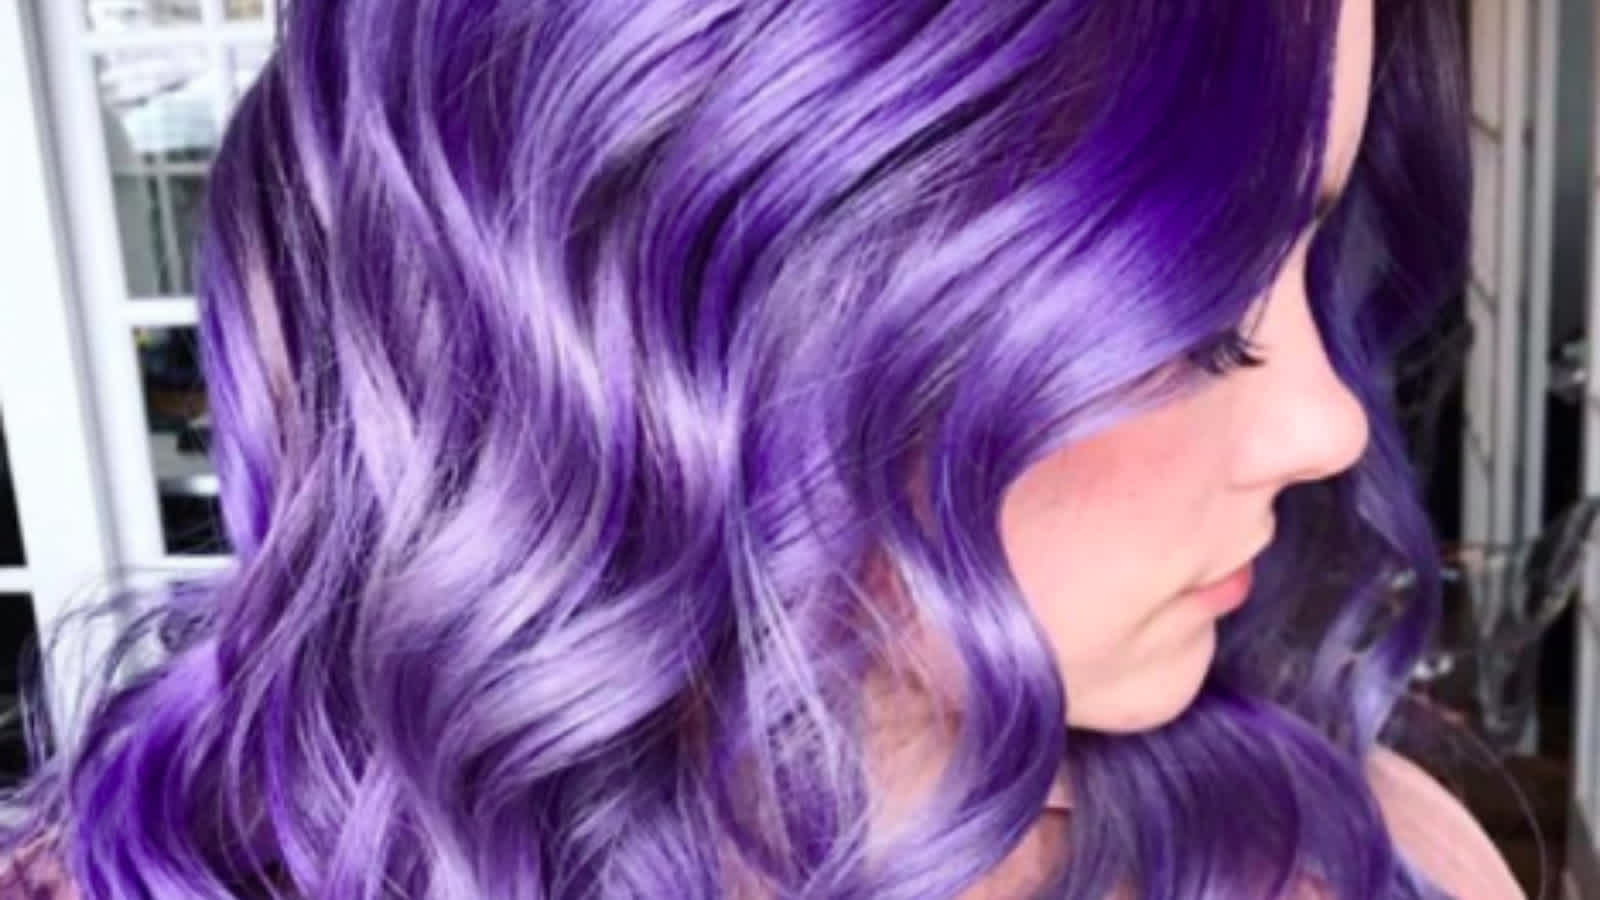 30 Purple Hair Color Trends Everyone Will Want to Copy | CafeMom.com